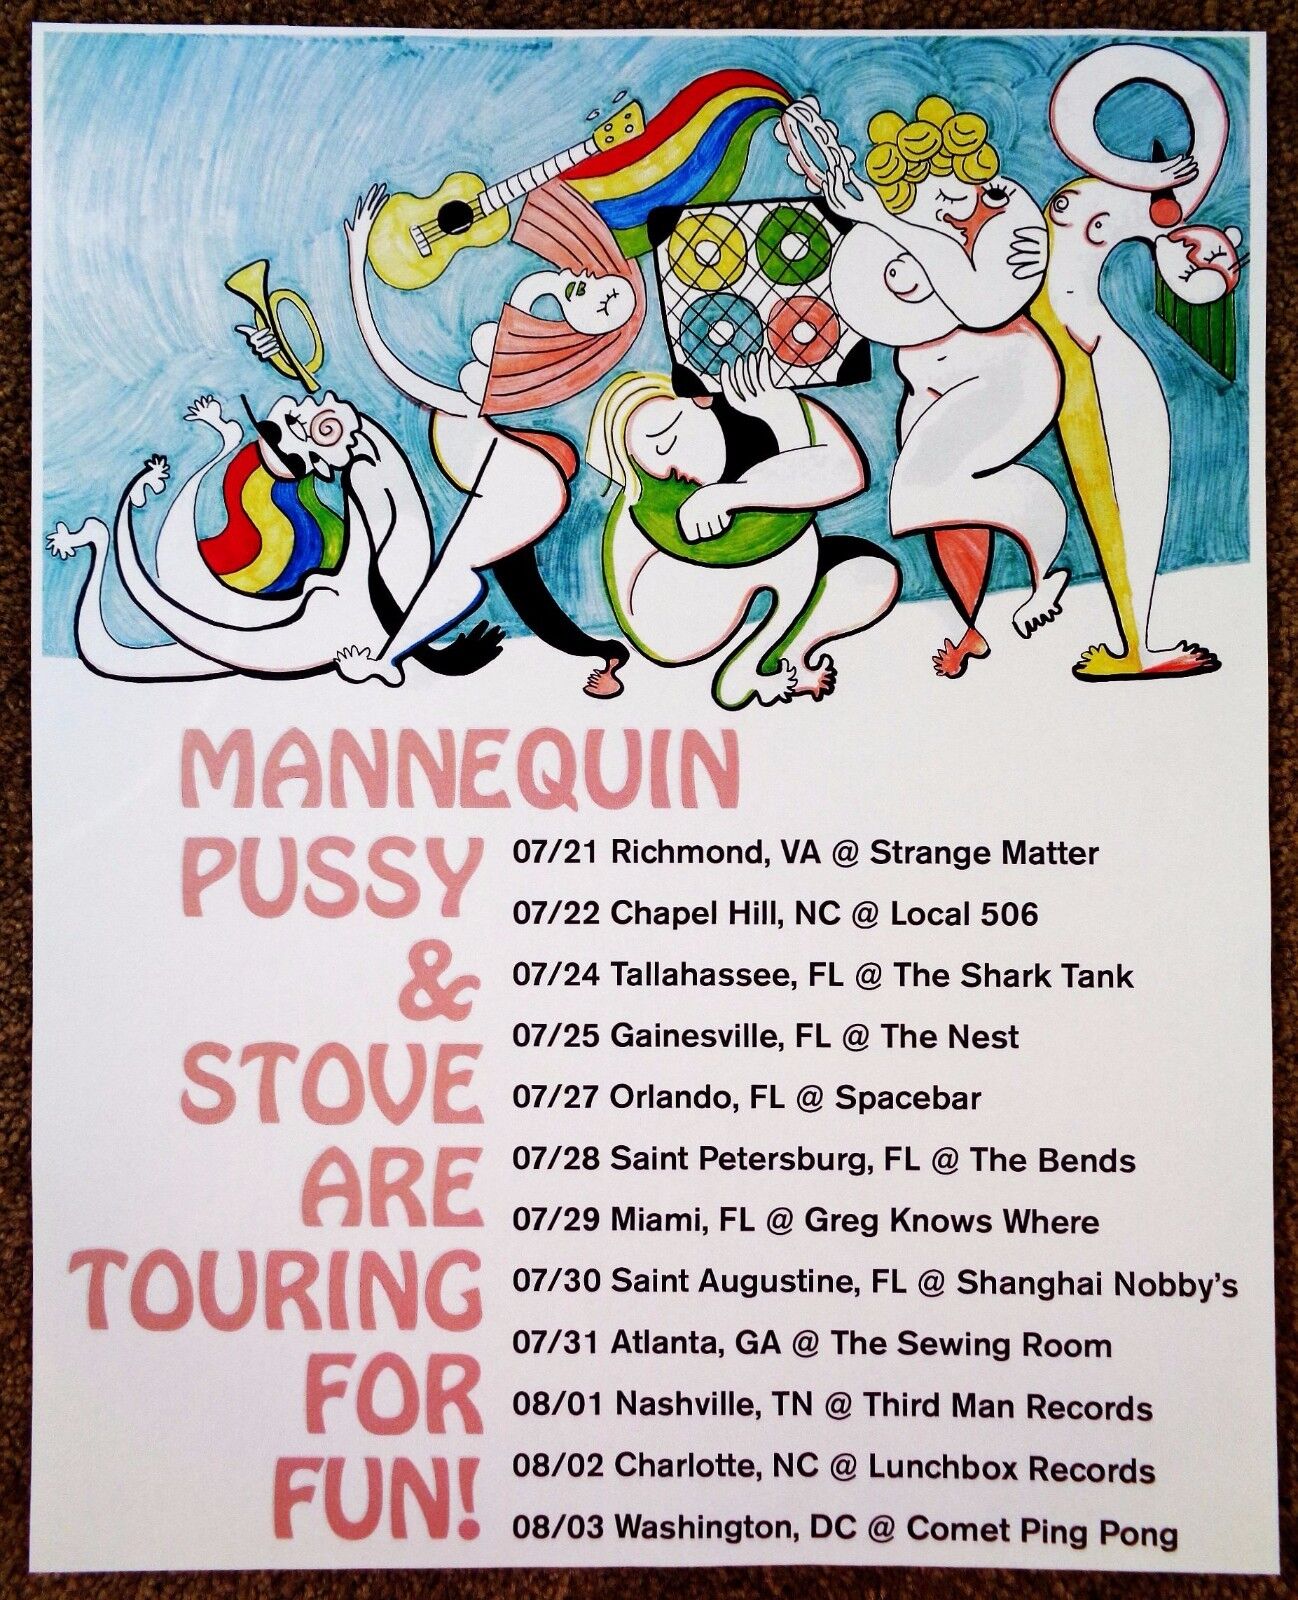 MANNEQUIN PUSSY 2016 Tour POSTER Gig Concert July-August